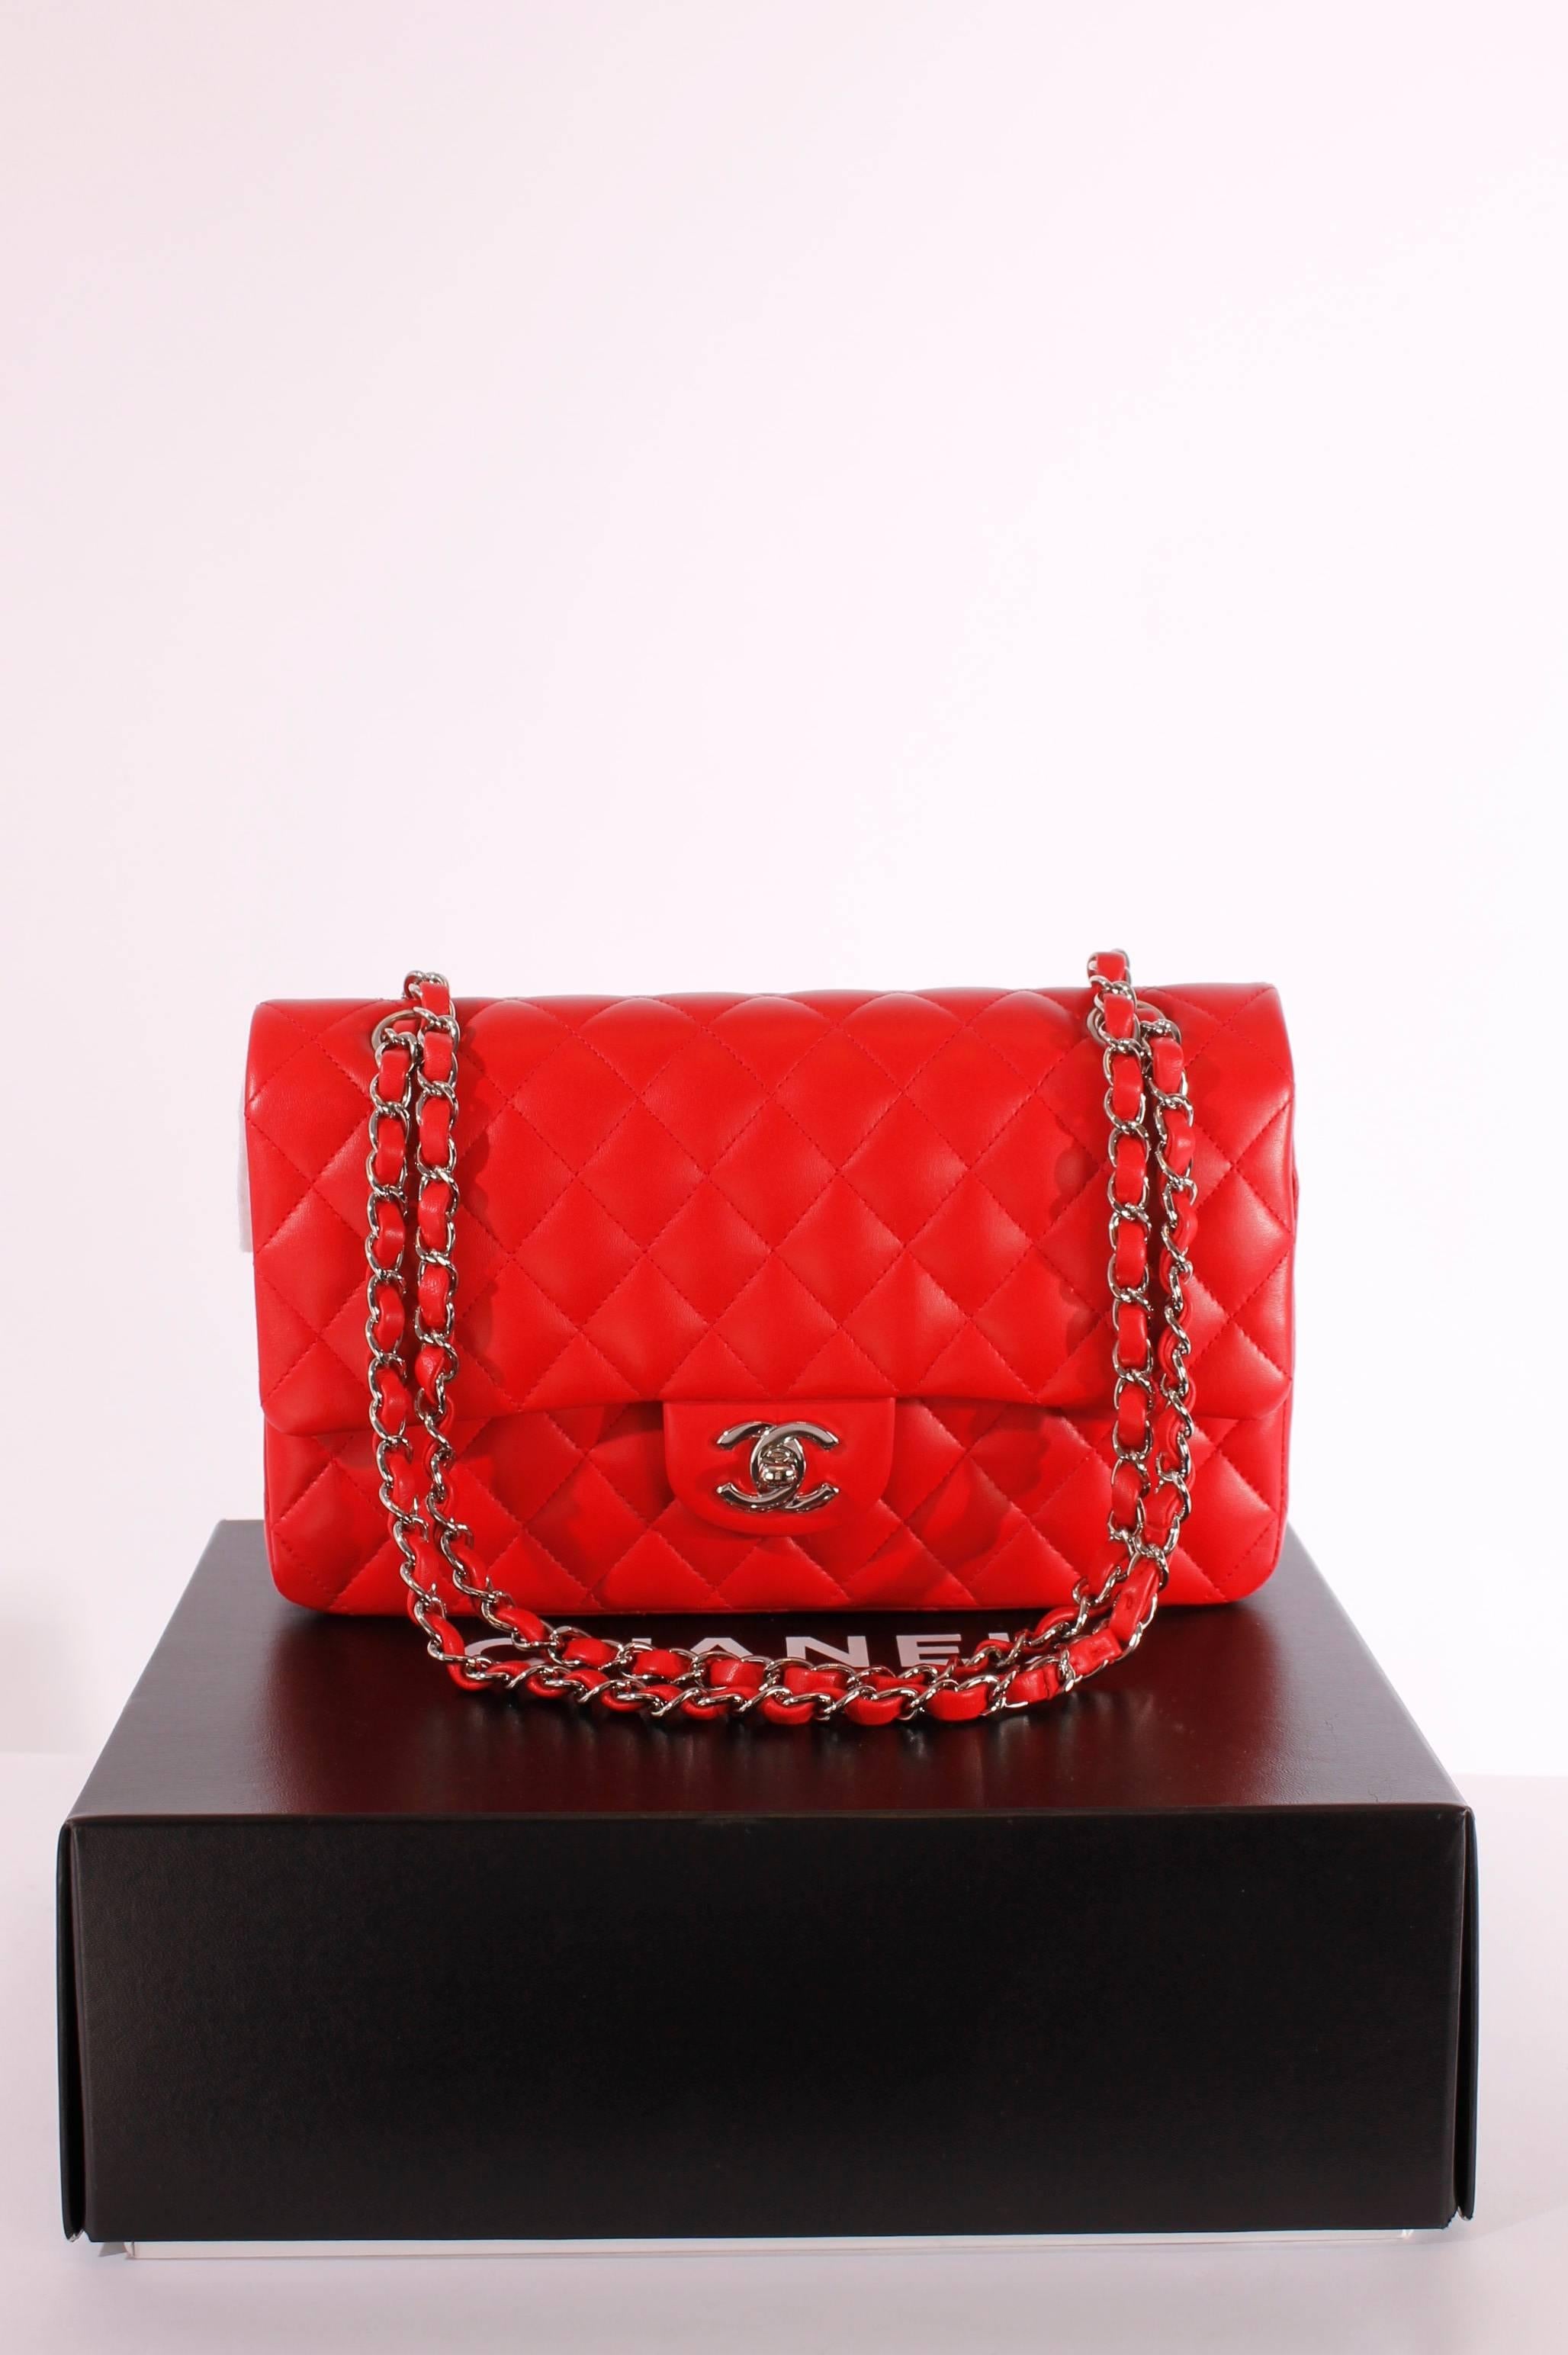 Classic bag by Chanel in bright red lambskin leather, this piece is like new!

This 2.55 medium double flap bag is the middle size of this classic model and measures 26 centimeters in length and is 16 centimeters high. A silver chain which can be